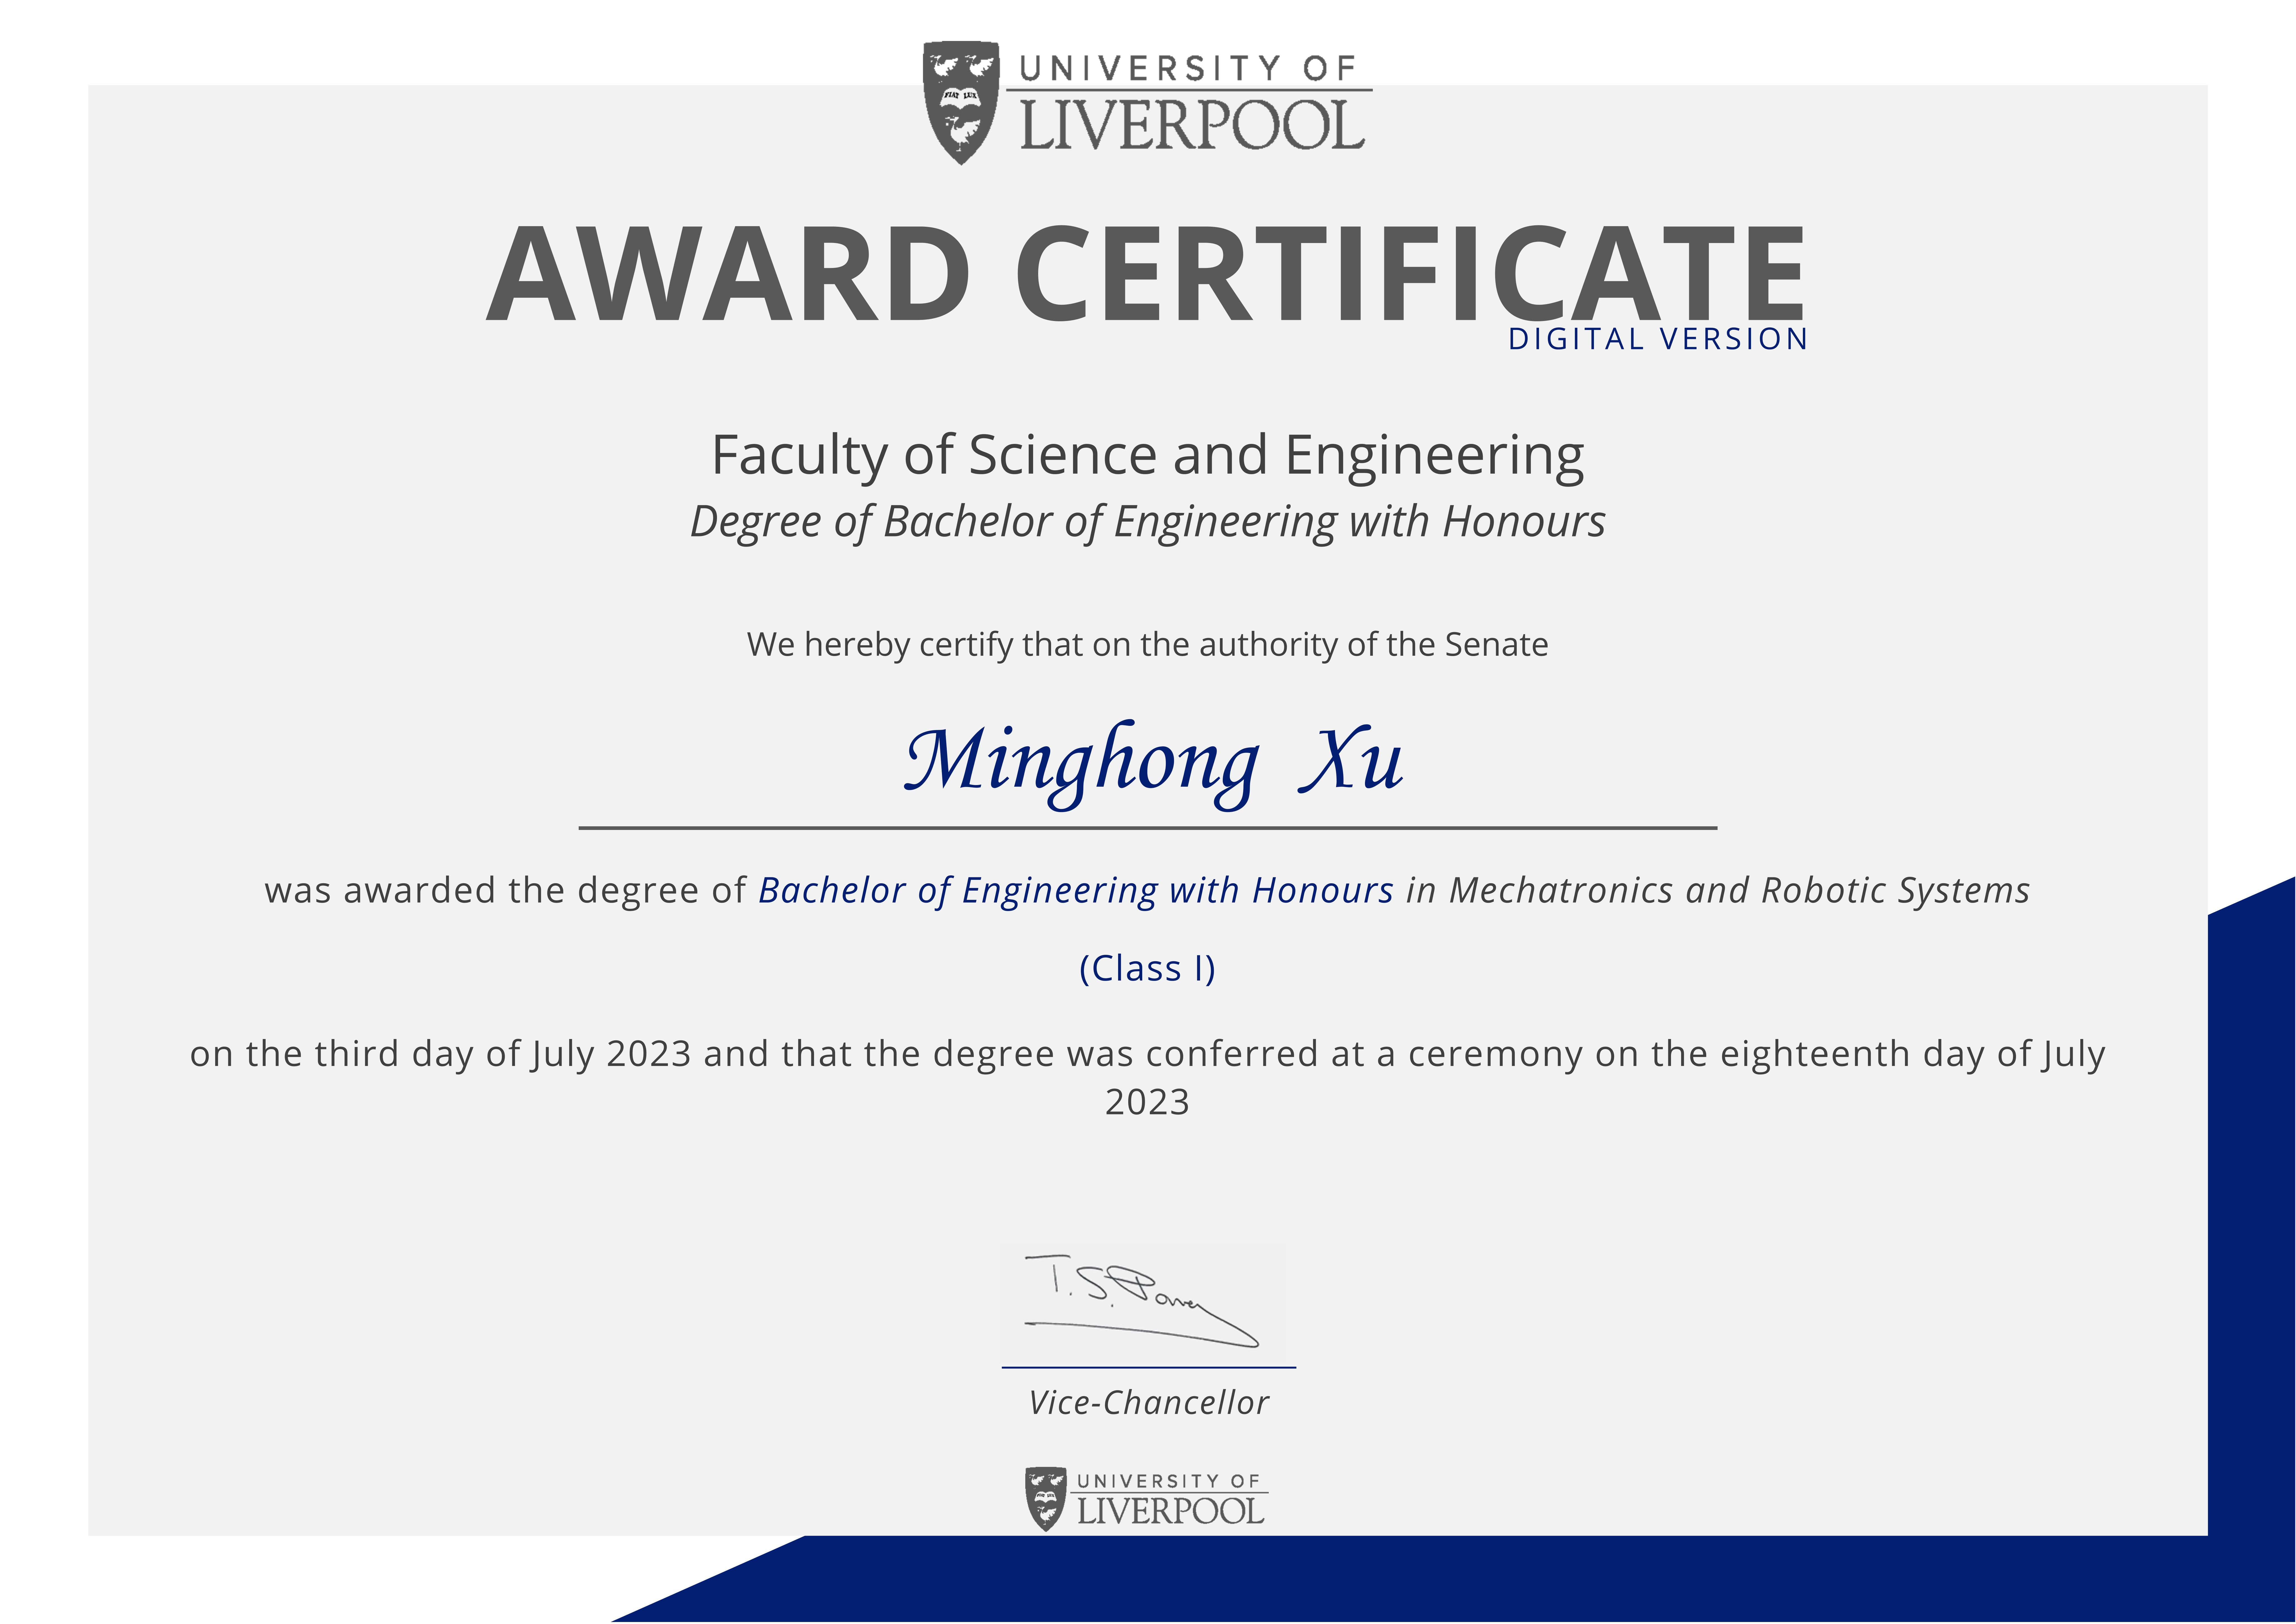 Degree certificate awarded by the University of Liverpool